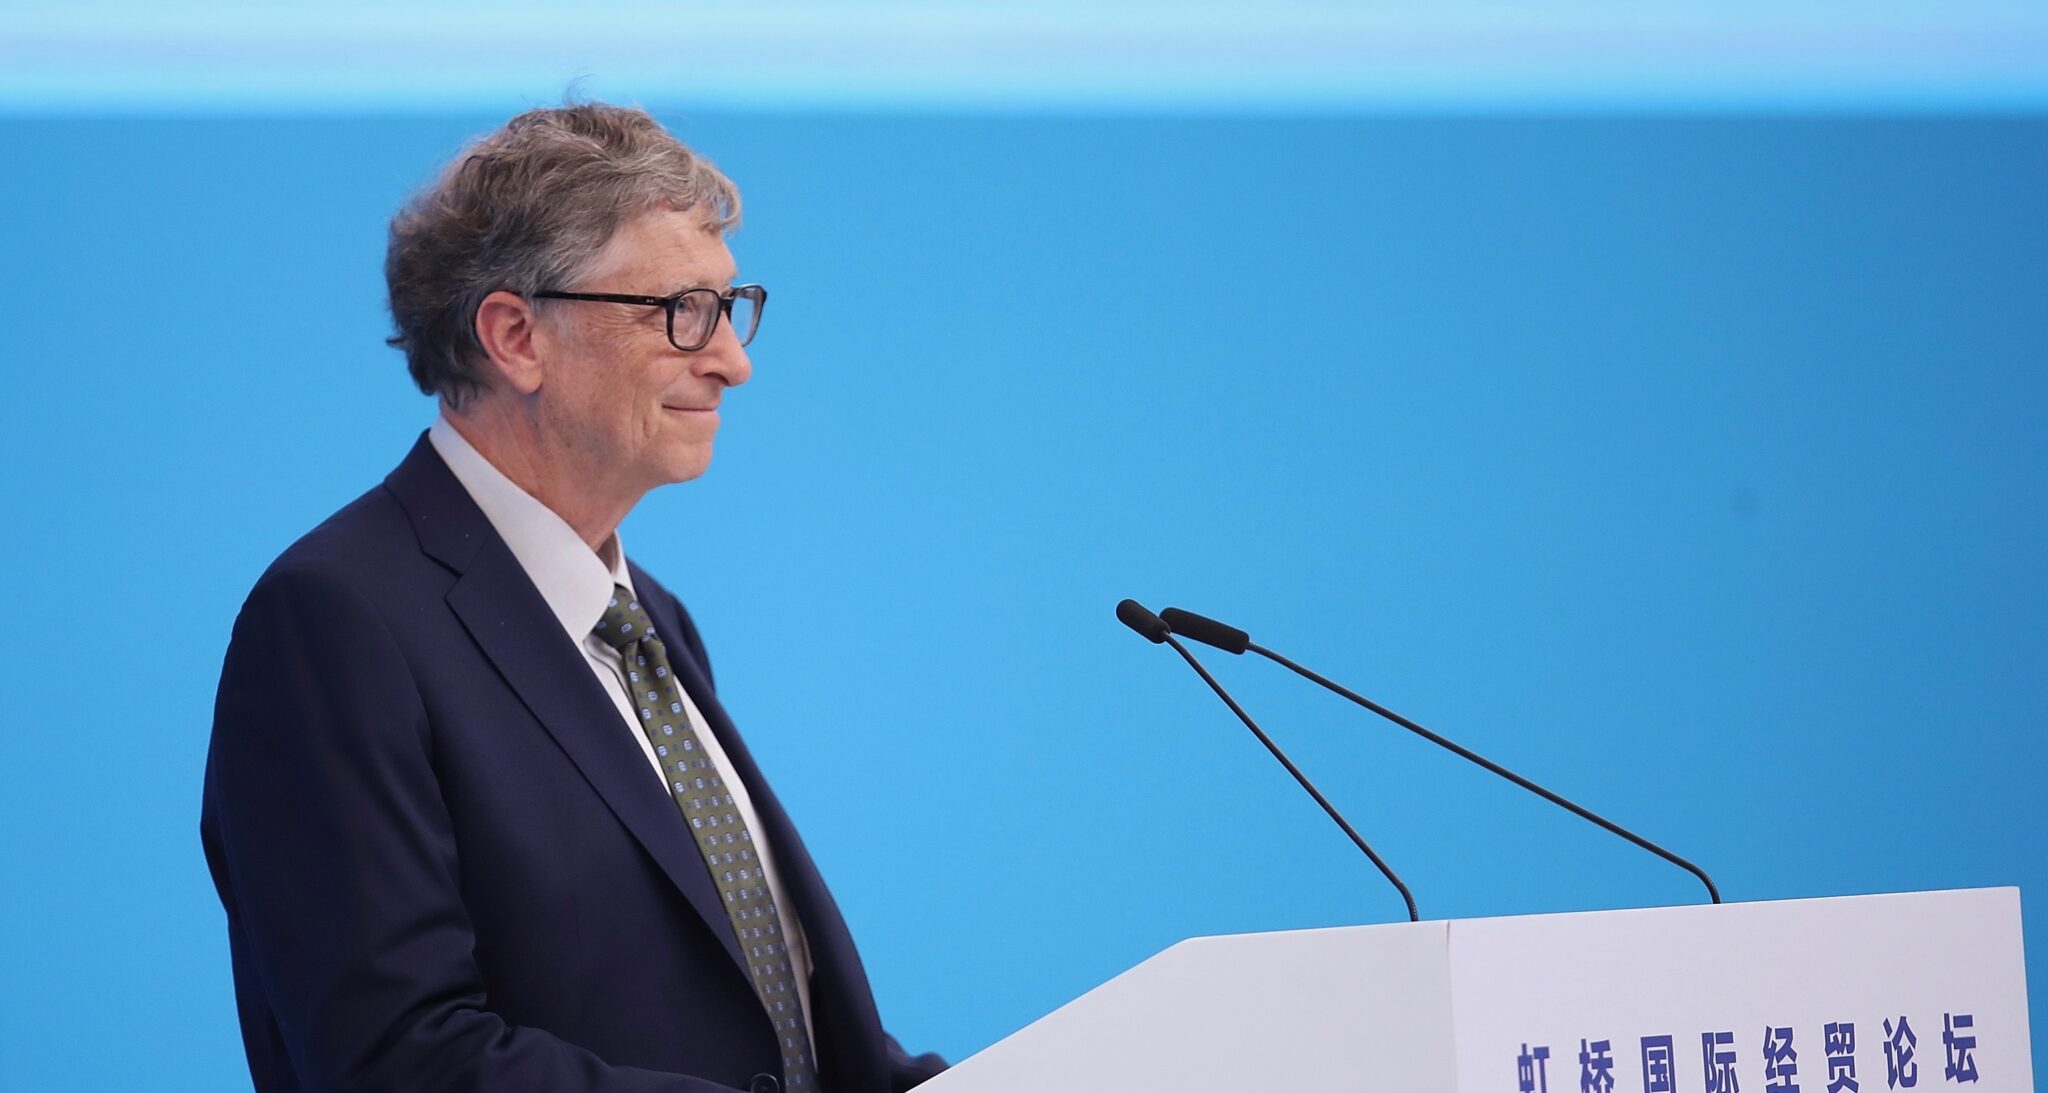 Bill Gates Unveils Toilet That Transforms Waste Into Fertilizer, Doesn't Require Water or Sewers - EcoWatch